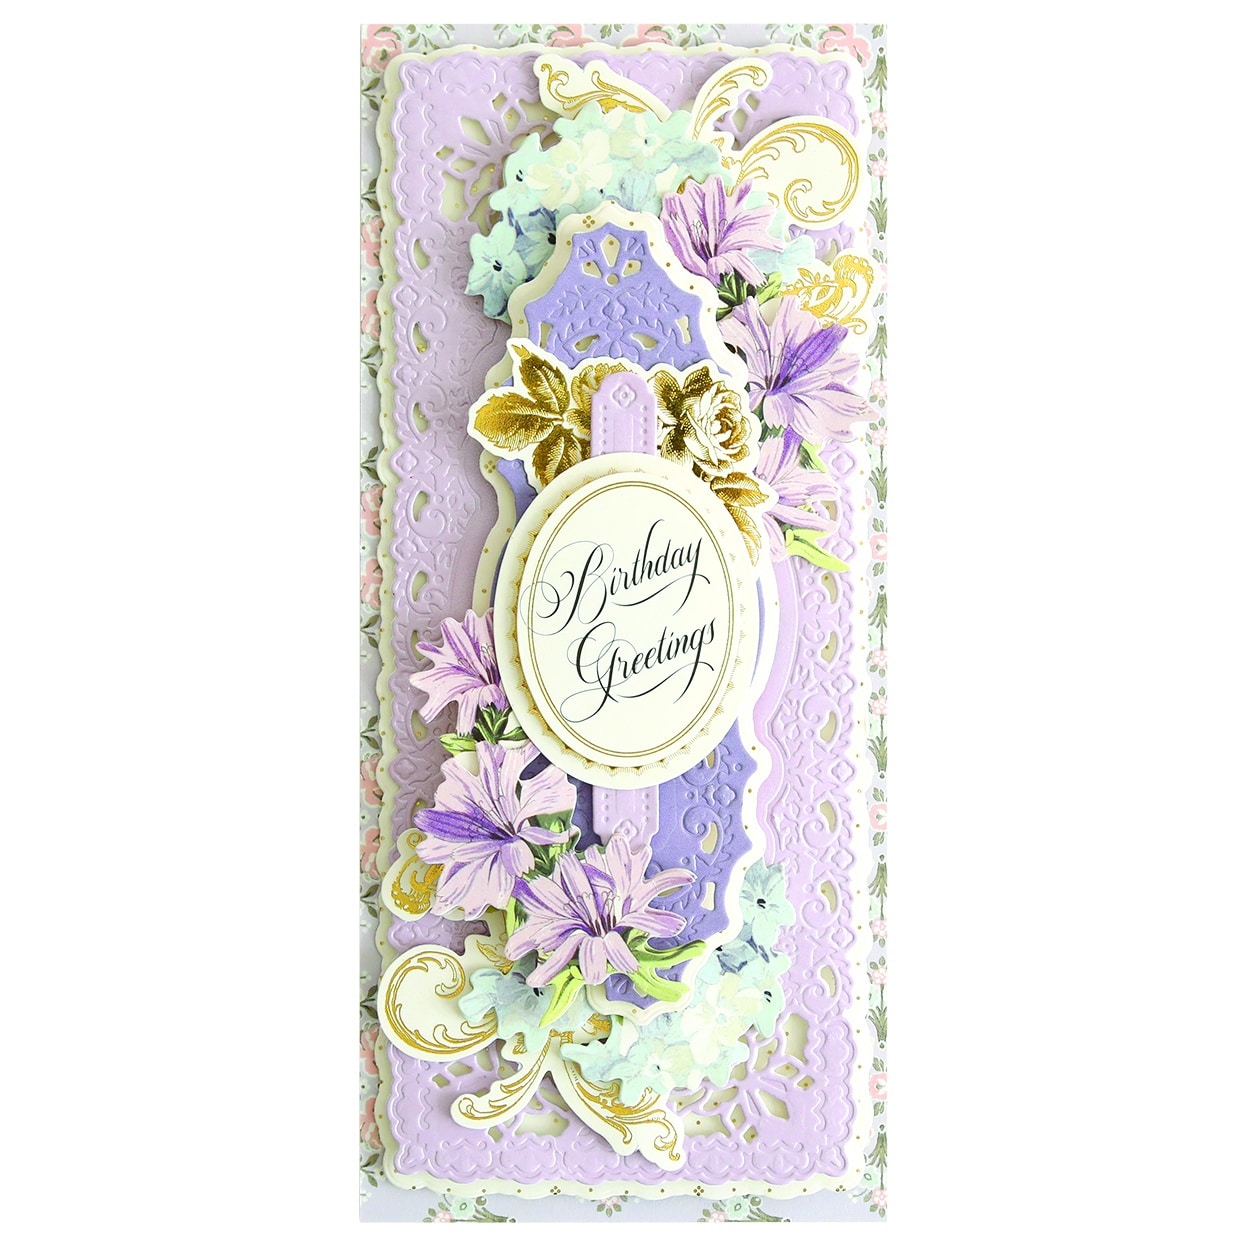 A purple and white card with flowers on it.